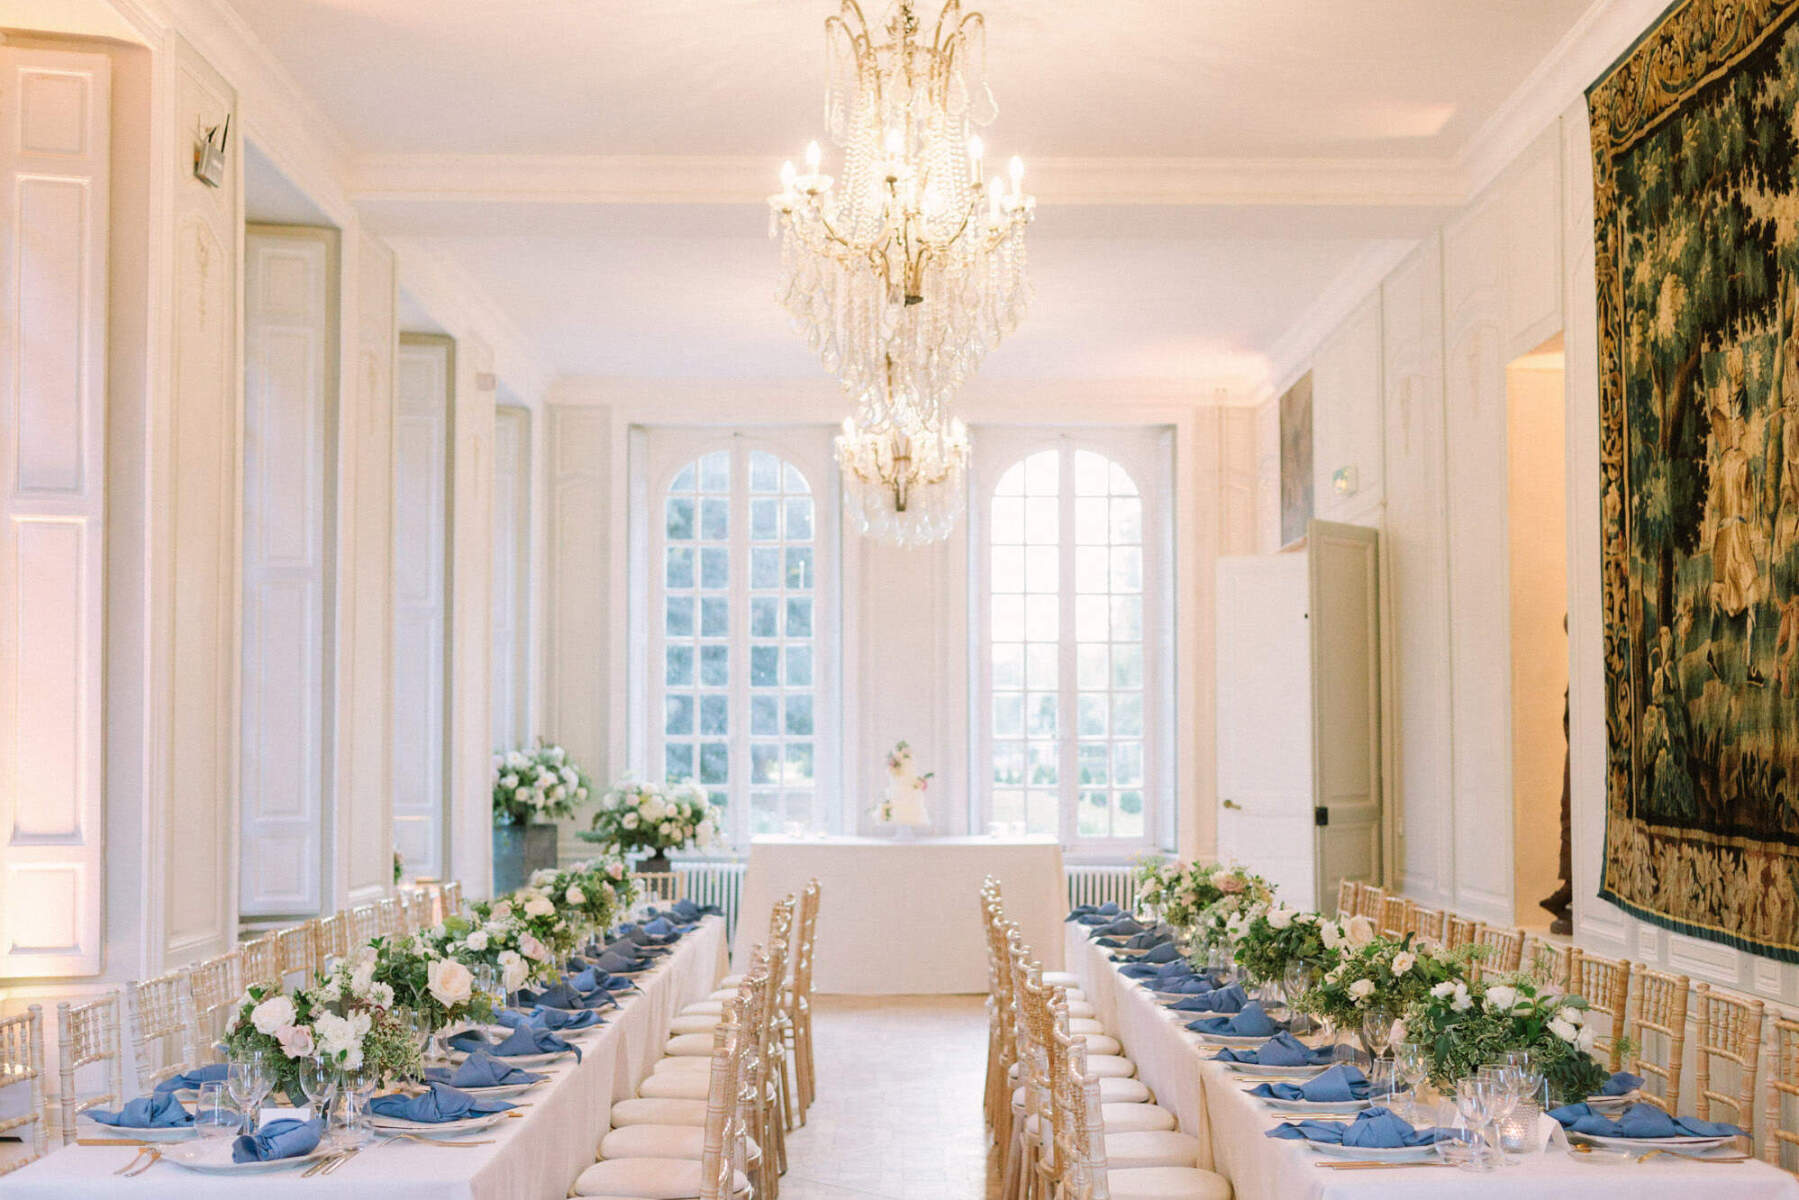 Wedding Etiquette Budget: An indoor reception setup with chandeliers hanging above and blue tablescapes.